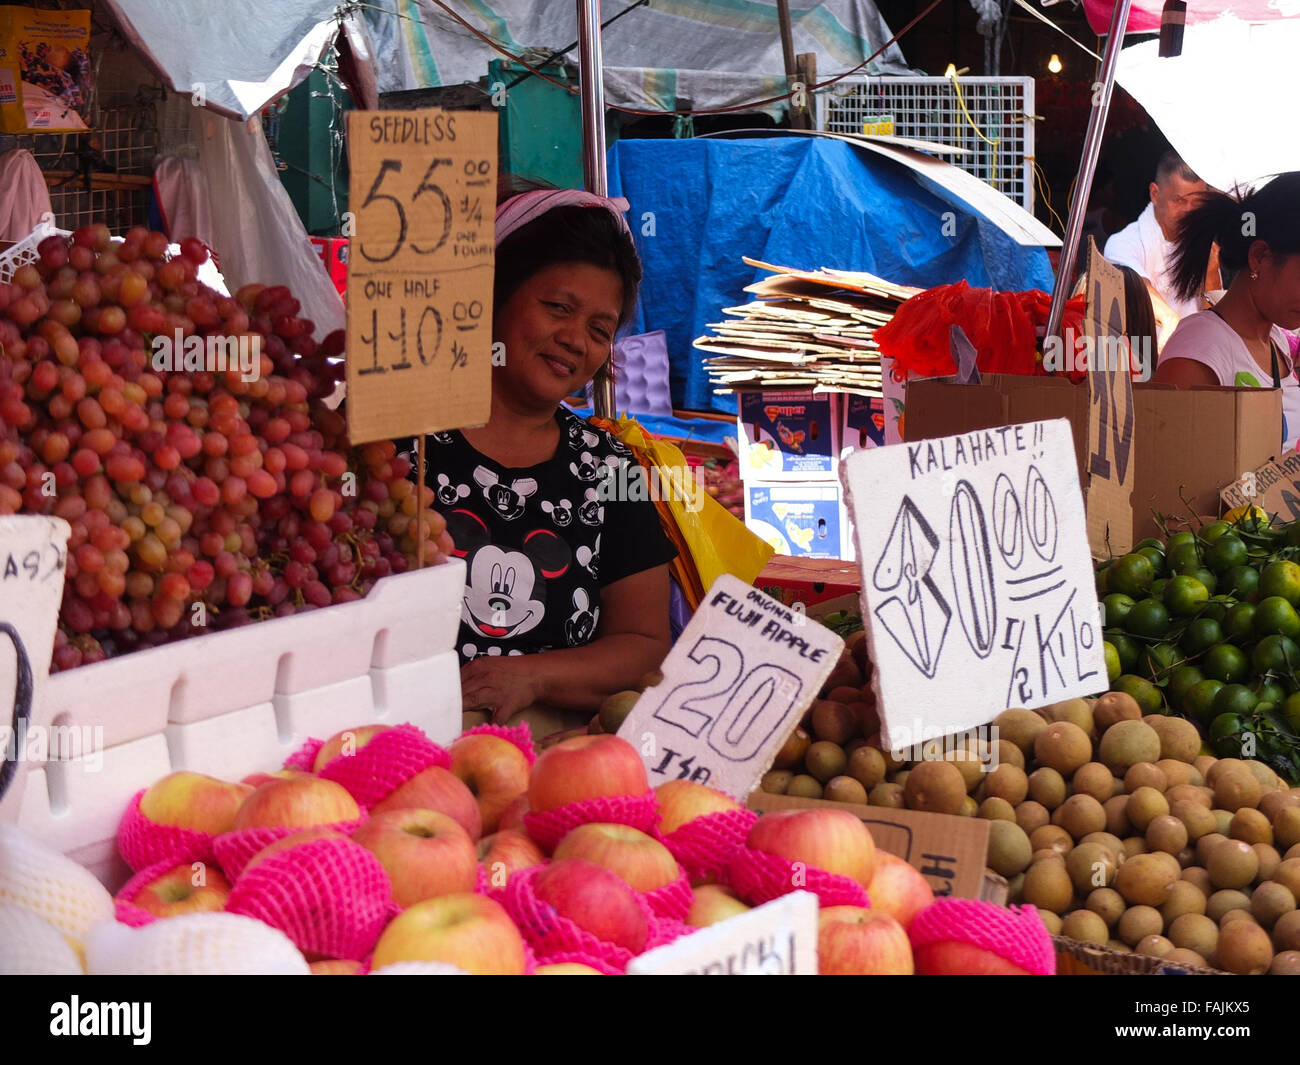 A fruit vendor smiling while being photographed at her fruits stand at Divisoria, manila. Filipinos anticipation of the last celebration on the calendar, The New Year's Eve with much merry making and superstitious belief on rounded fruits, It believes that it could bring luck. (Photo by Josefiel Rivera / Pacific Press) Stock Photo